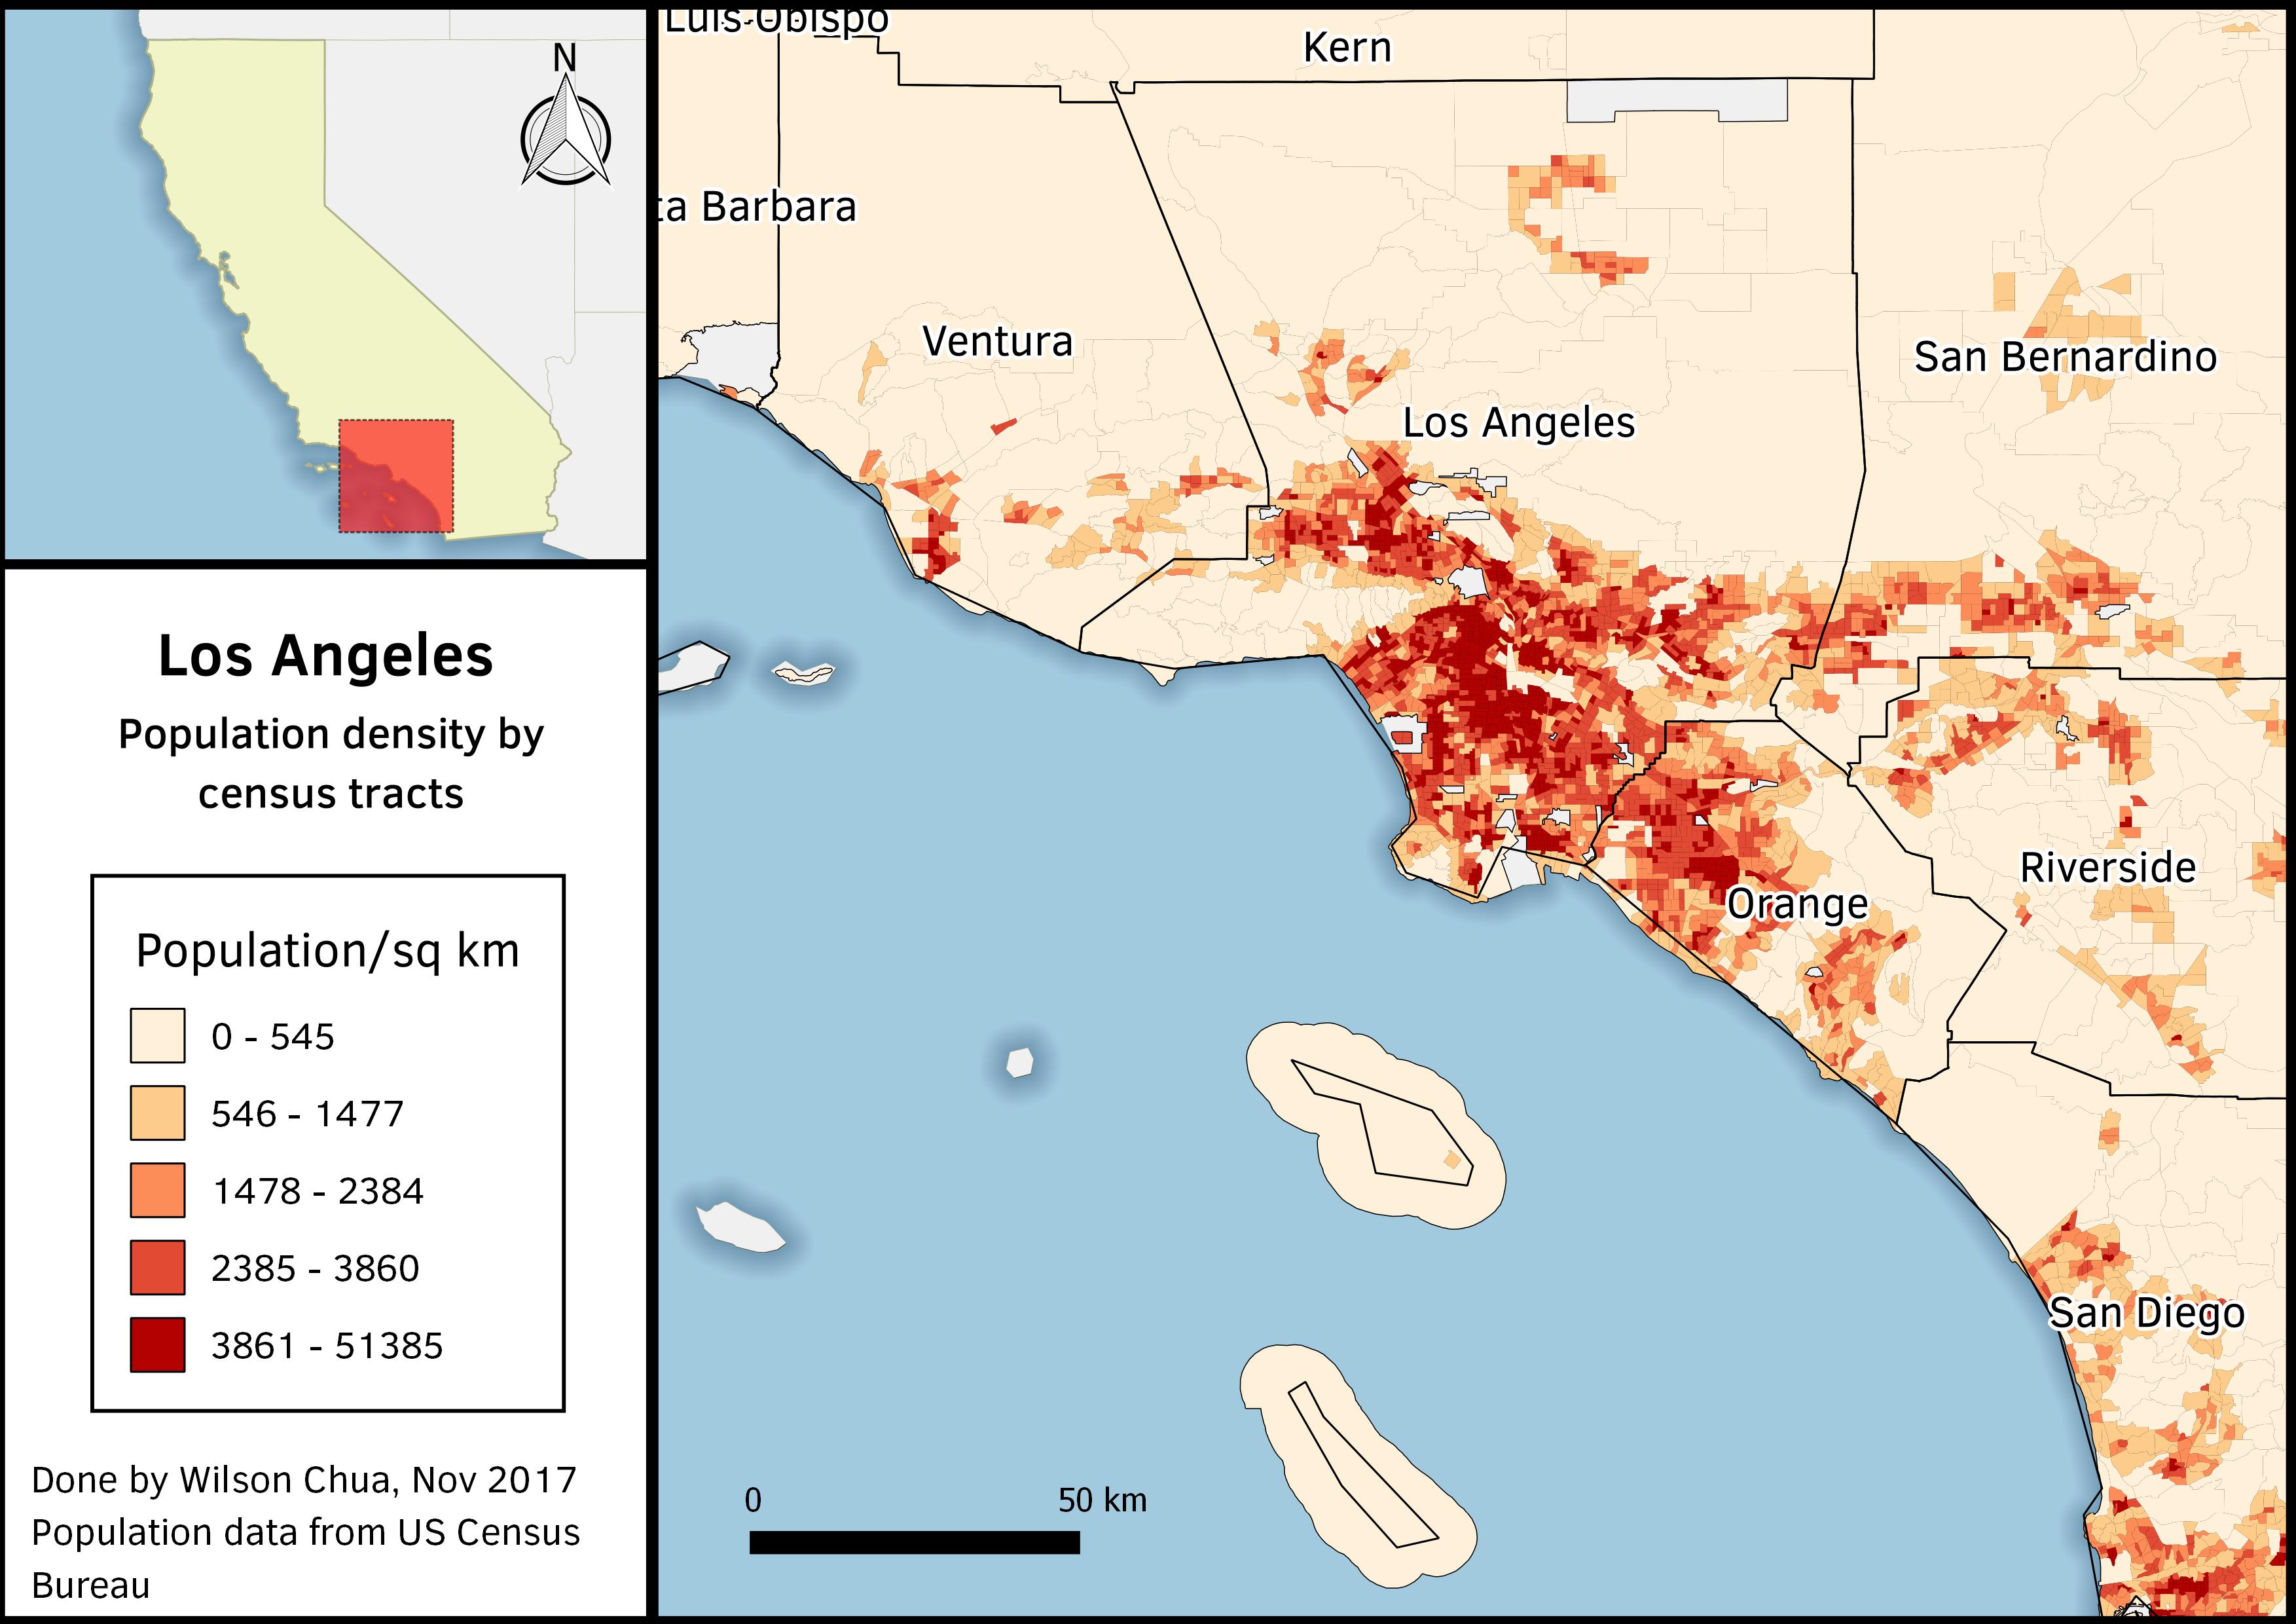 Population Density of Los Angeles, per Census Tract